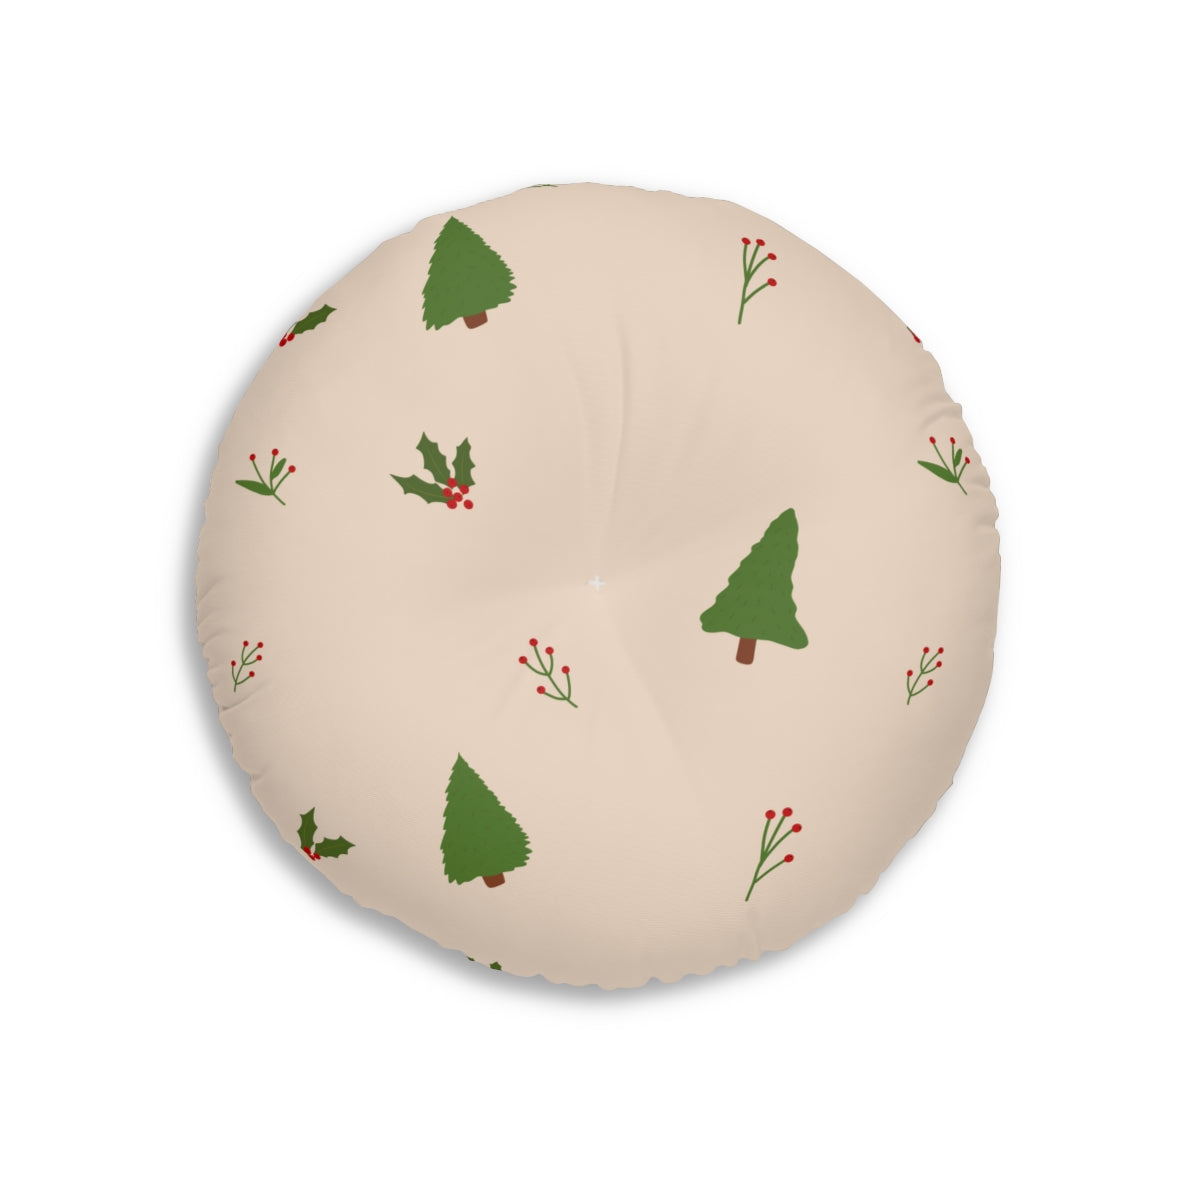 Lifestyle Details - Beige Round Tufted Holiday Floor Pillow - Evergreen Trees & Holly - 26x26 - Front View